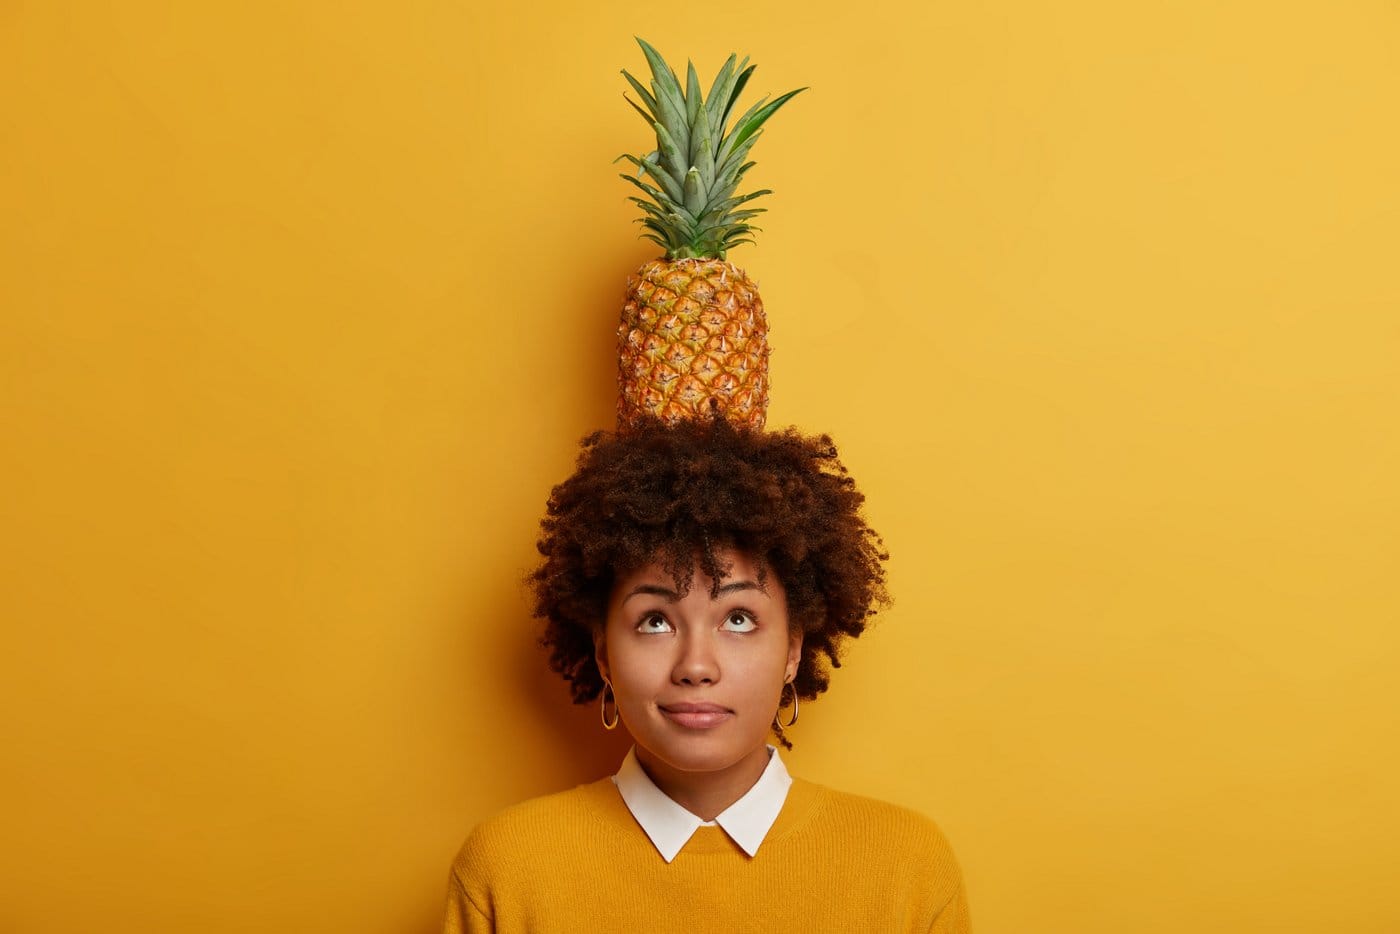 Woman with a pineapple on her head